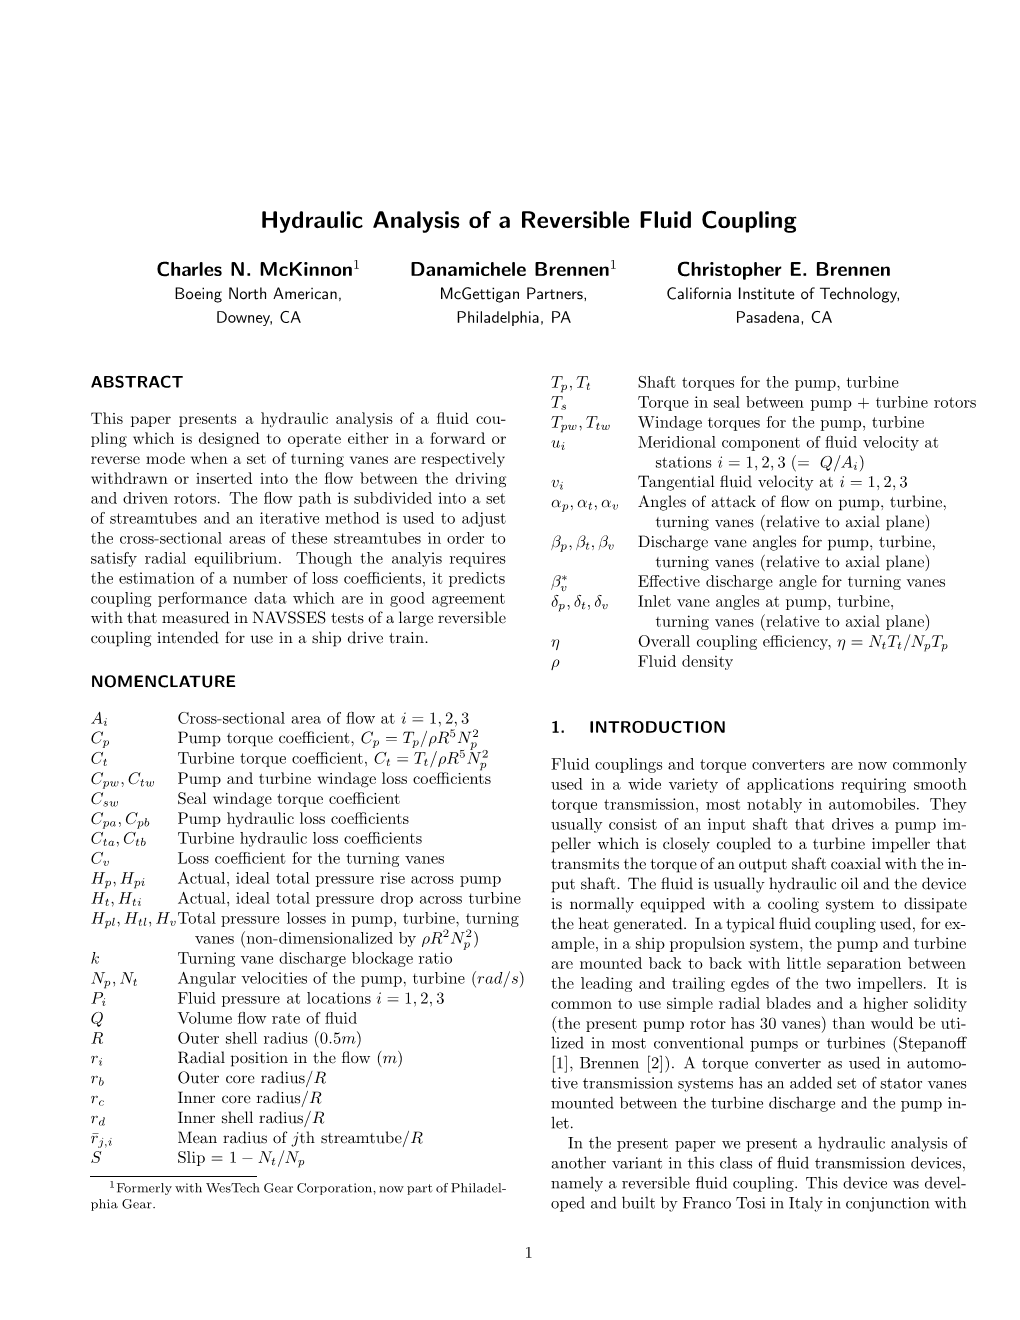 Hydraulic Analysis of a Reversible Fluid Coupling